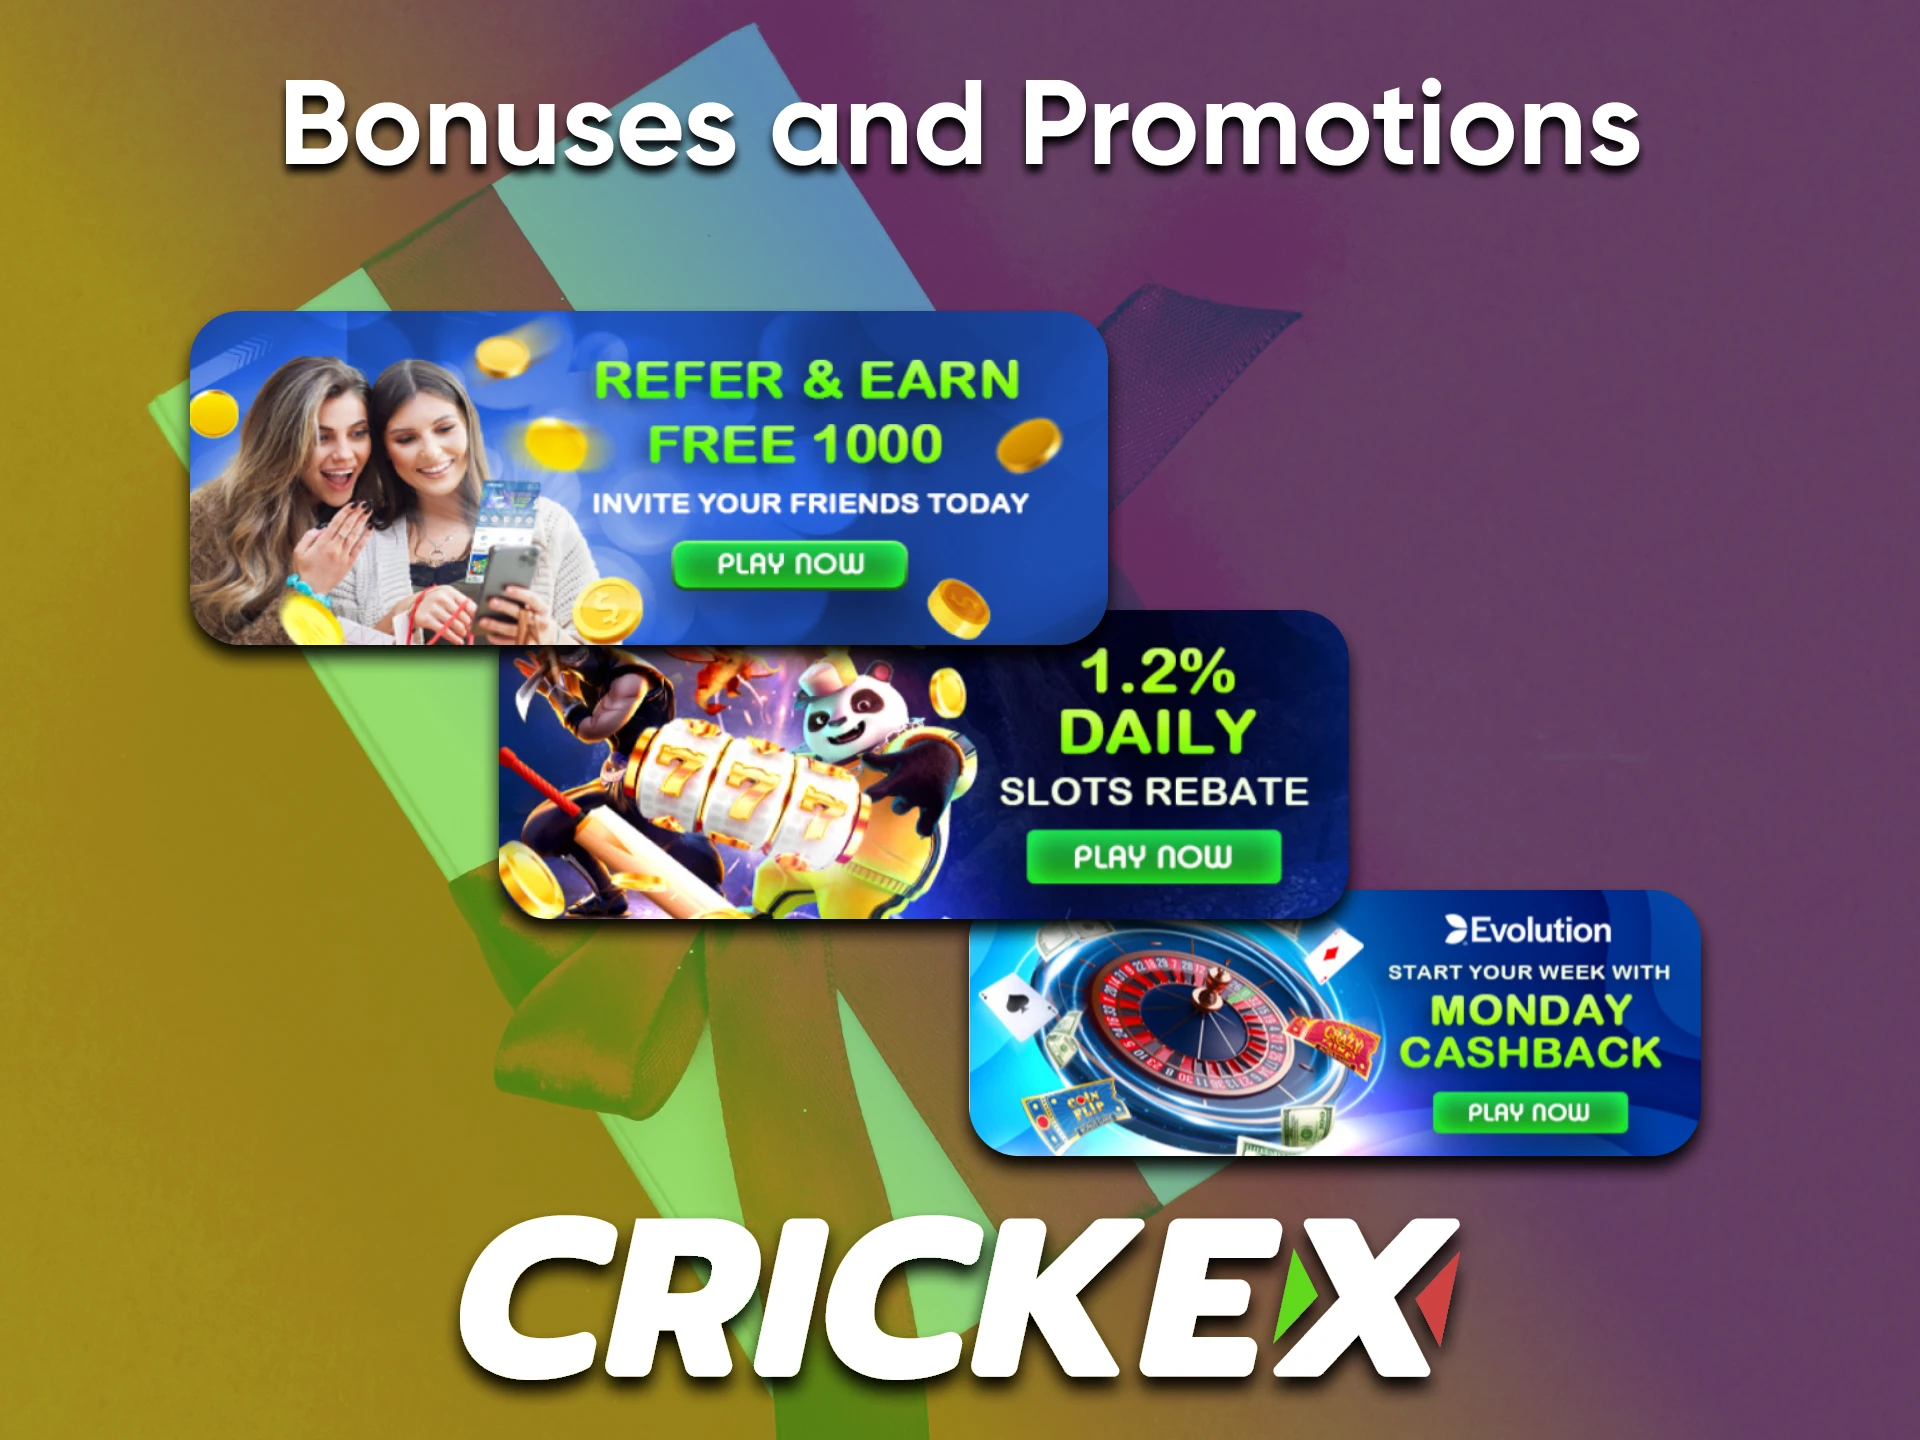 By using Crickex for casino games and betting, you receive various bonuses.